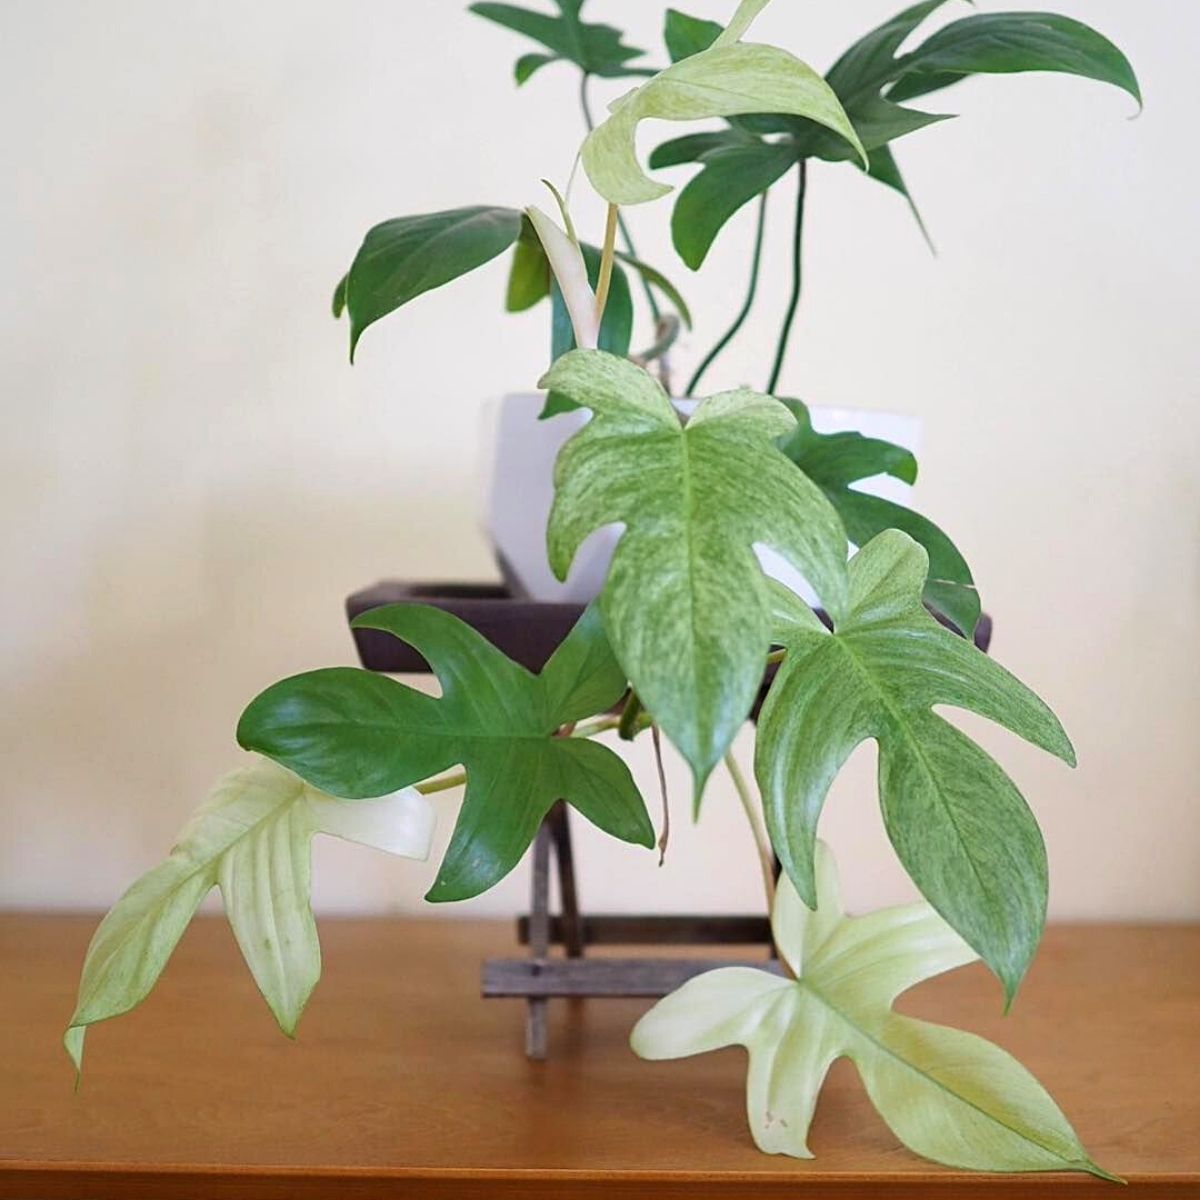 Philodendron is one of the best houseplants with large leaves for 2022 - Article on Thursd